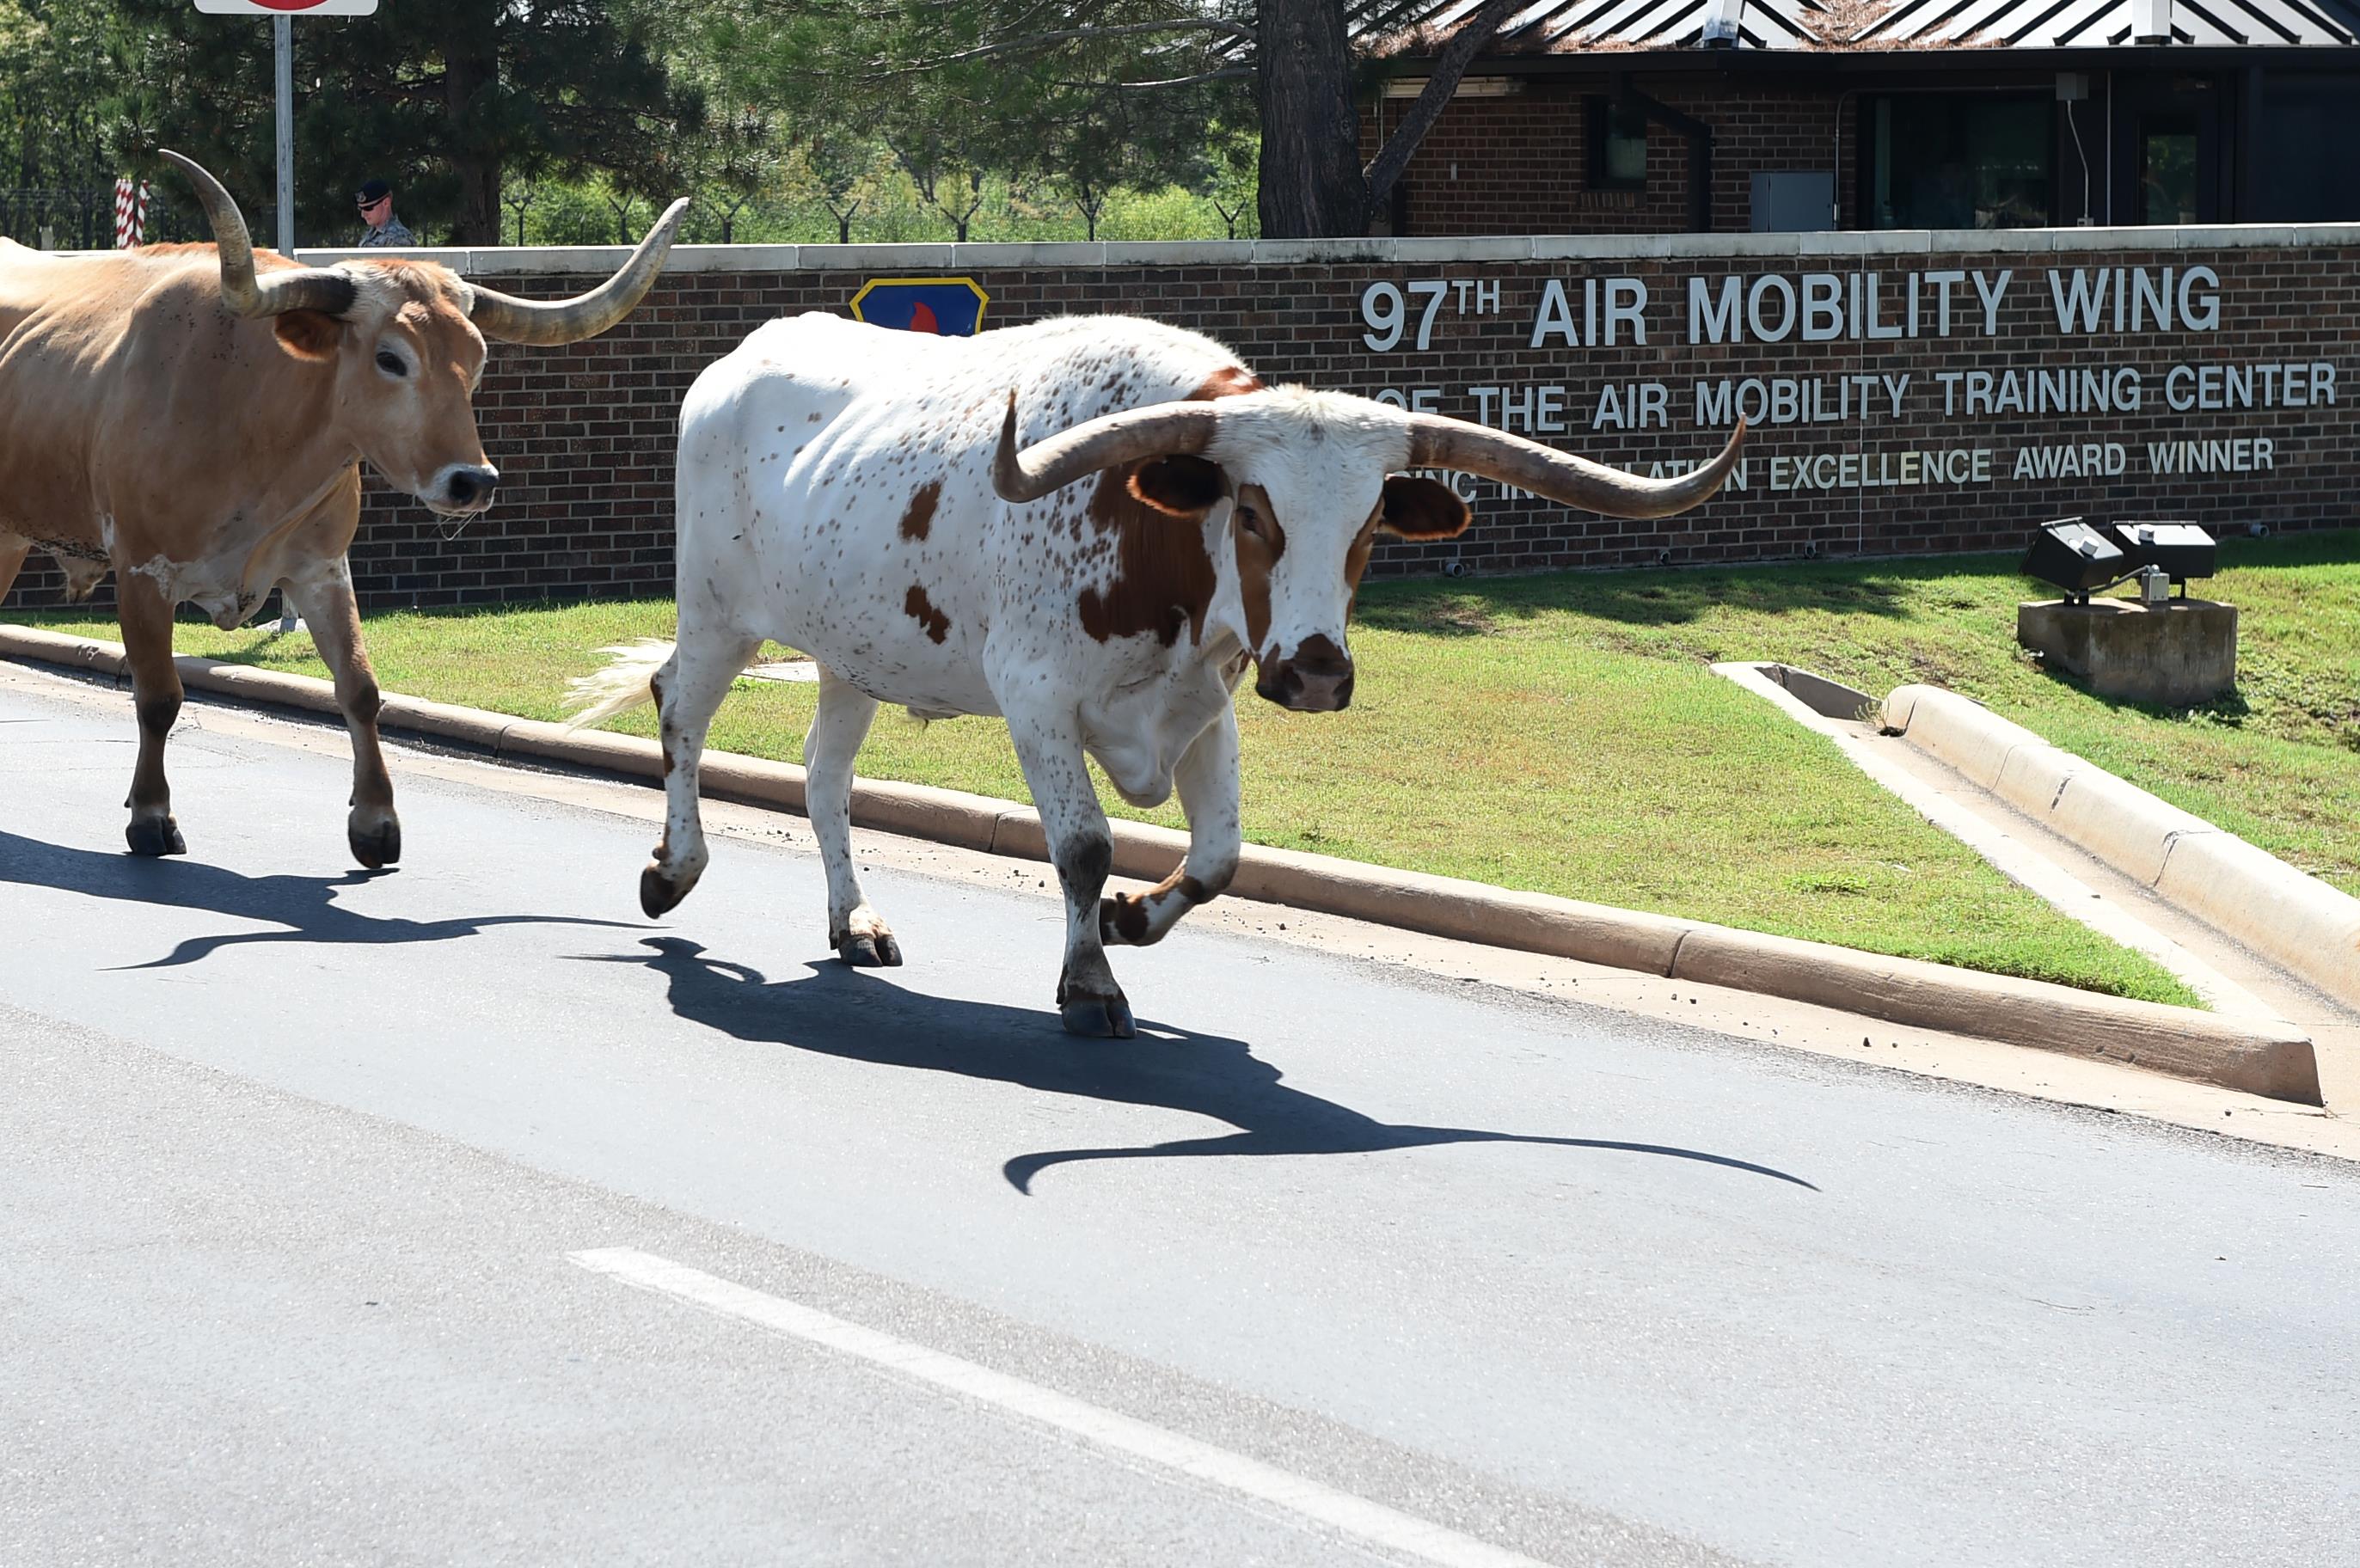 Texas Longhorn cattle walk off Altus Air Force Base, Okla. after the 18th annual Cattle Drive August 25, 2016. Approximately 18 Texas Longhorn cattle were driven through Altus AFB at this year’s base Cattle Drive which provided opportunity for community members to share part of their culture with the Airmen and their families. Source: US Air Force photo by Senior Airman Dillon Davis.